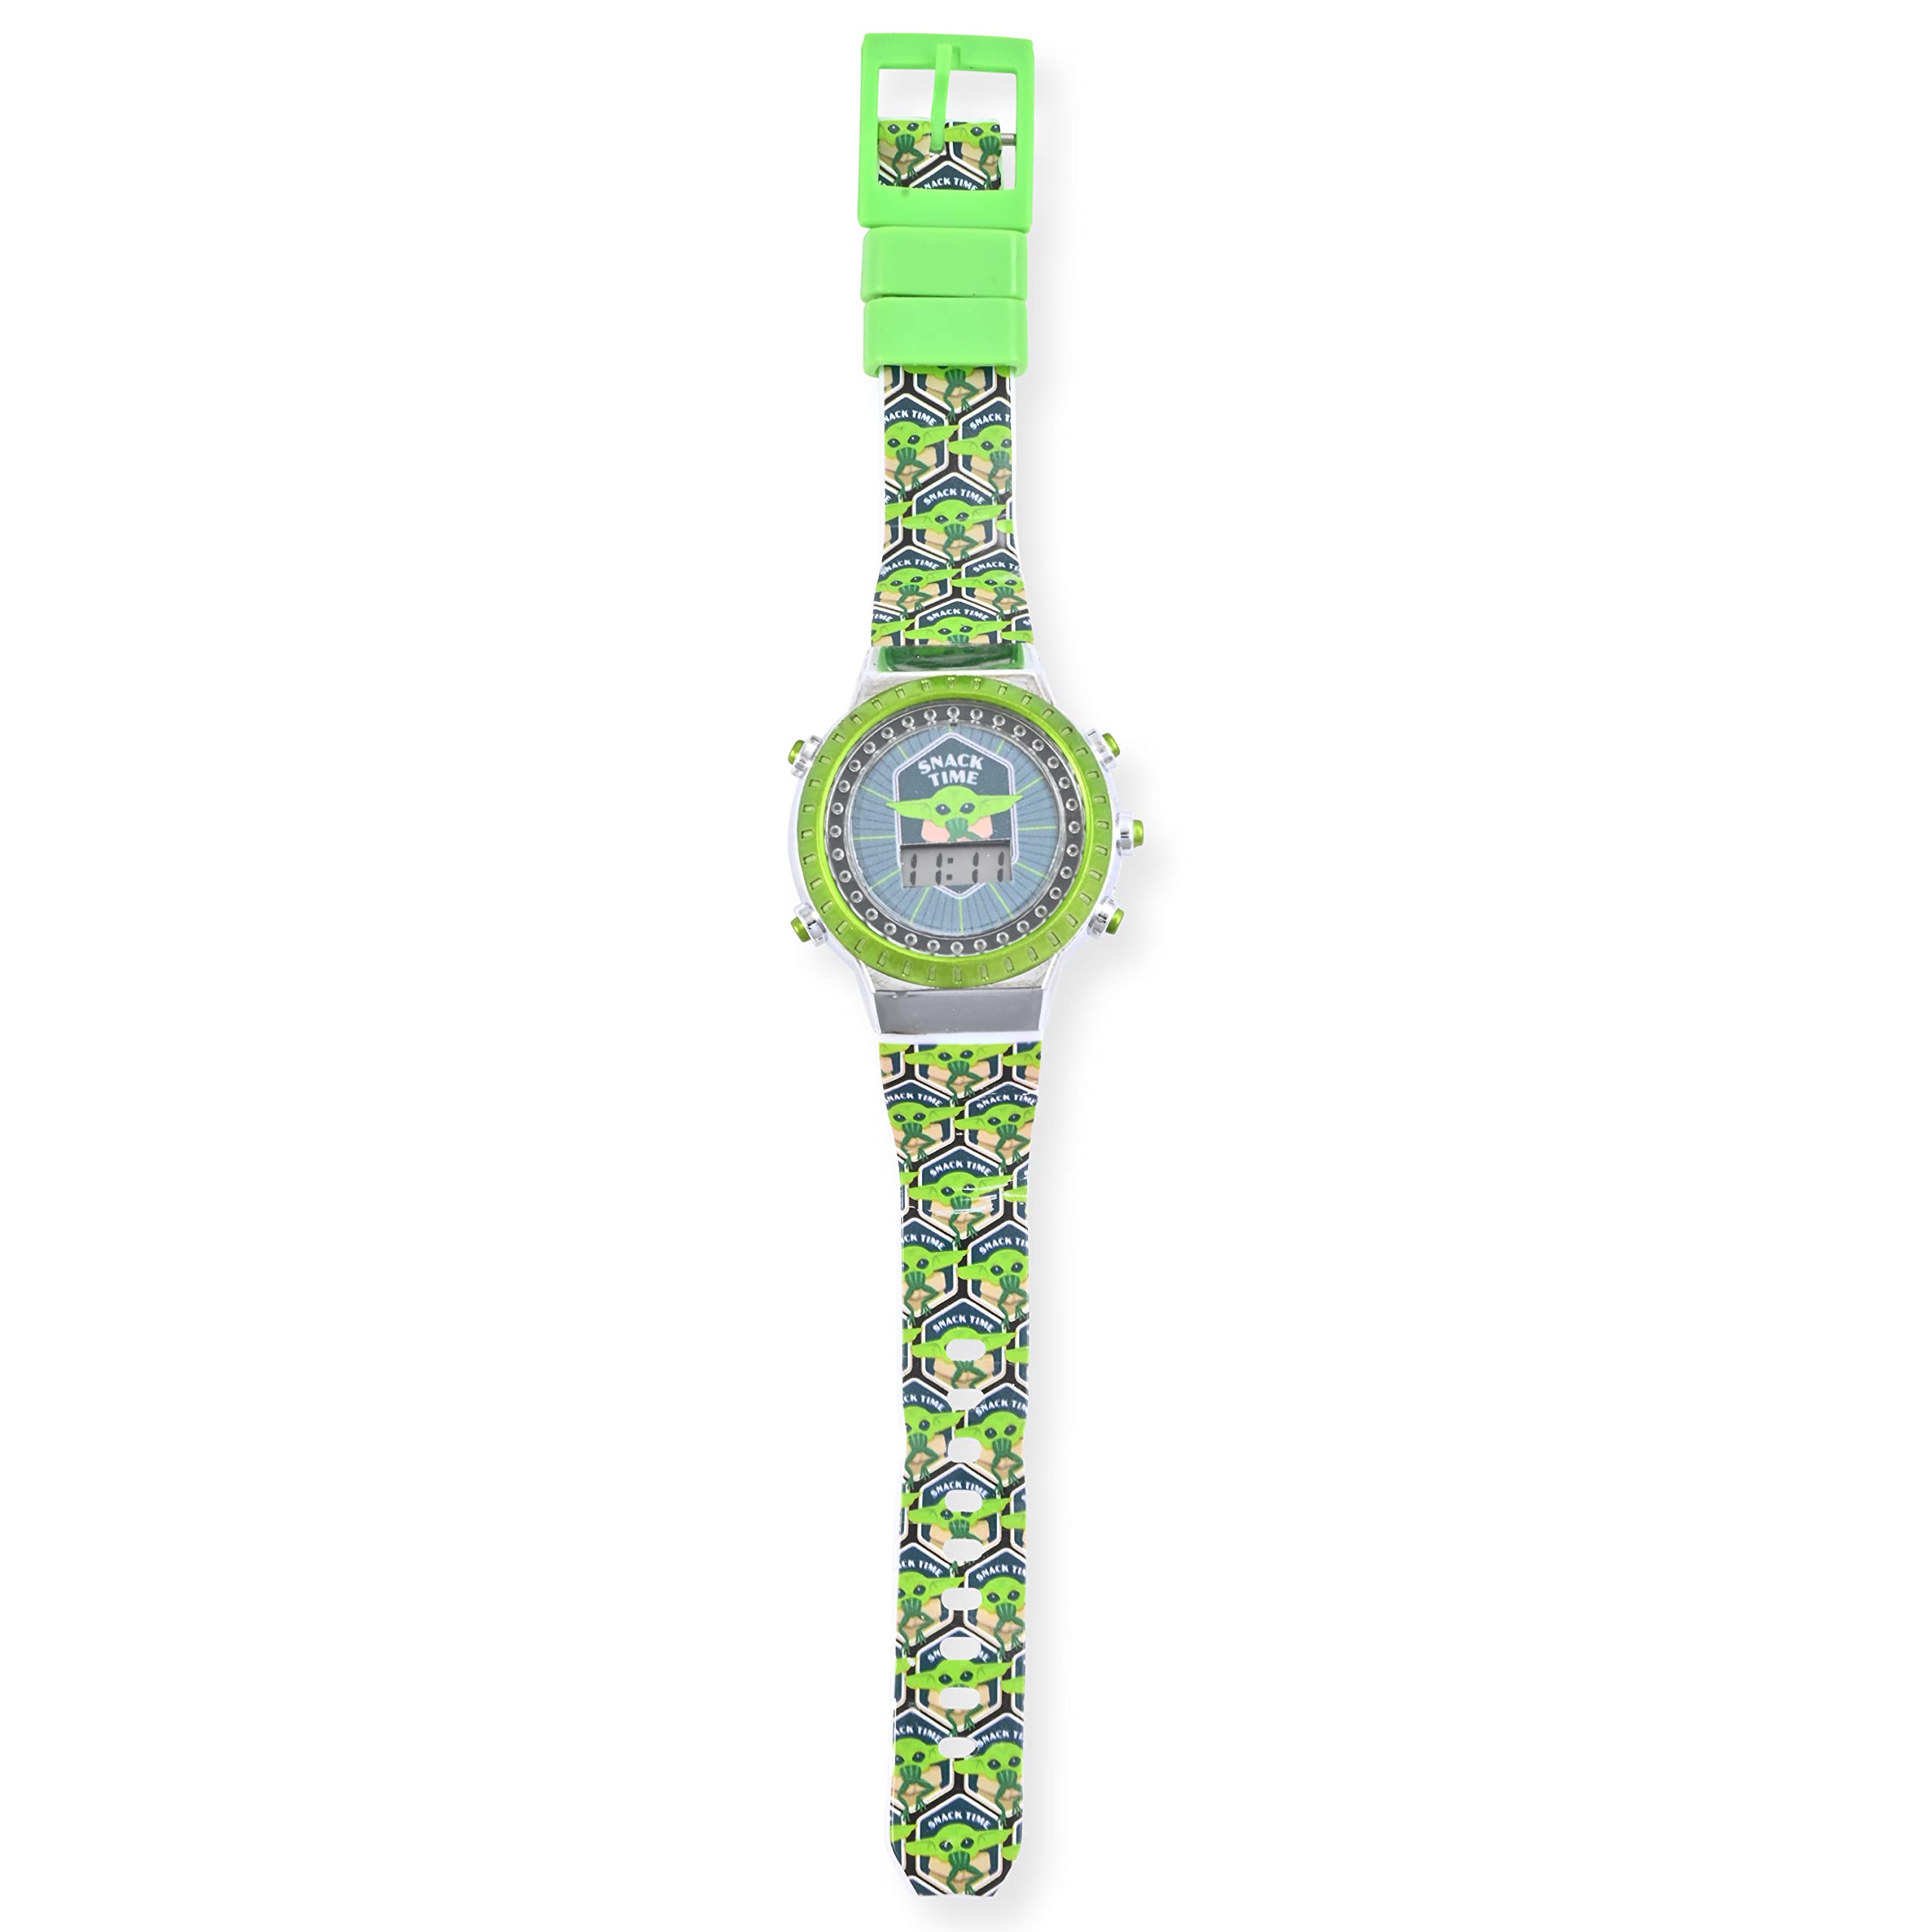 Accutime Lucasfilm Star Wars Mandalorian Digital Kids Watch - LED Flaching Lights, LCD Display, Toddlers, Girls Or Boys, Silicone Strap in Green (Model: MNL4013AZ)